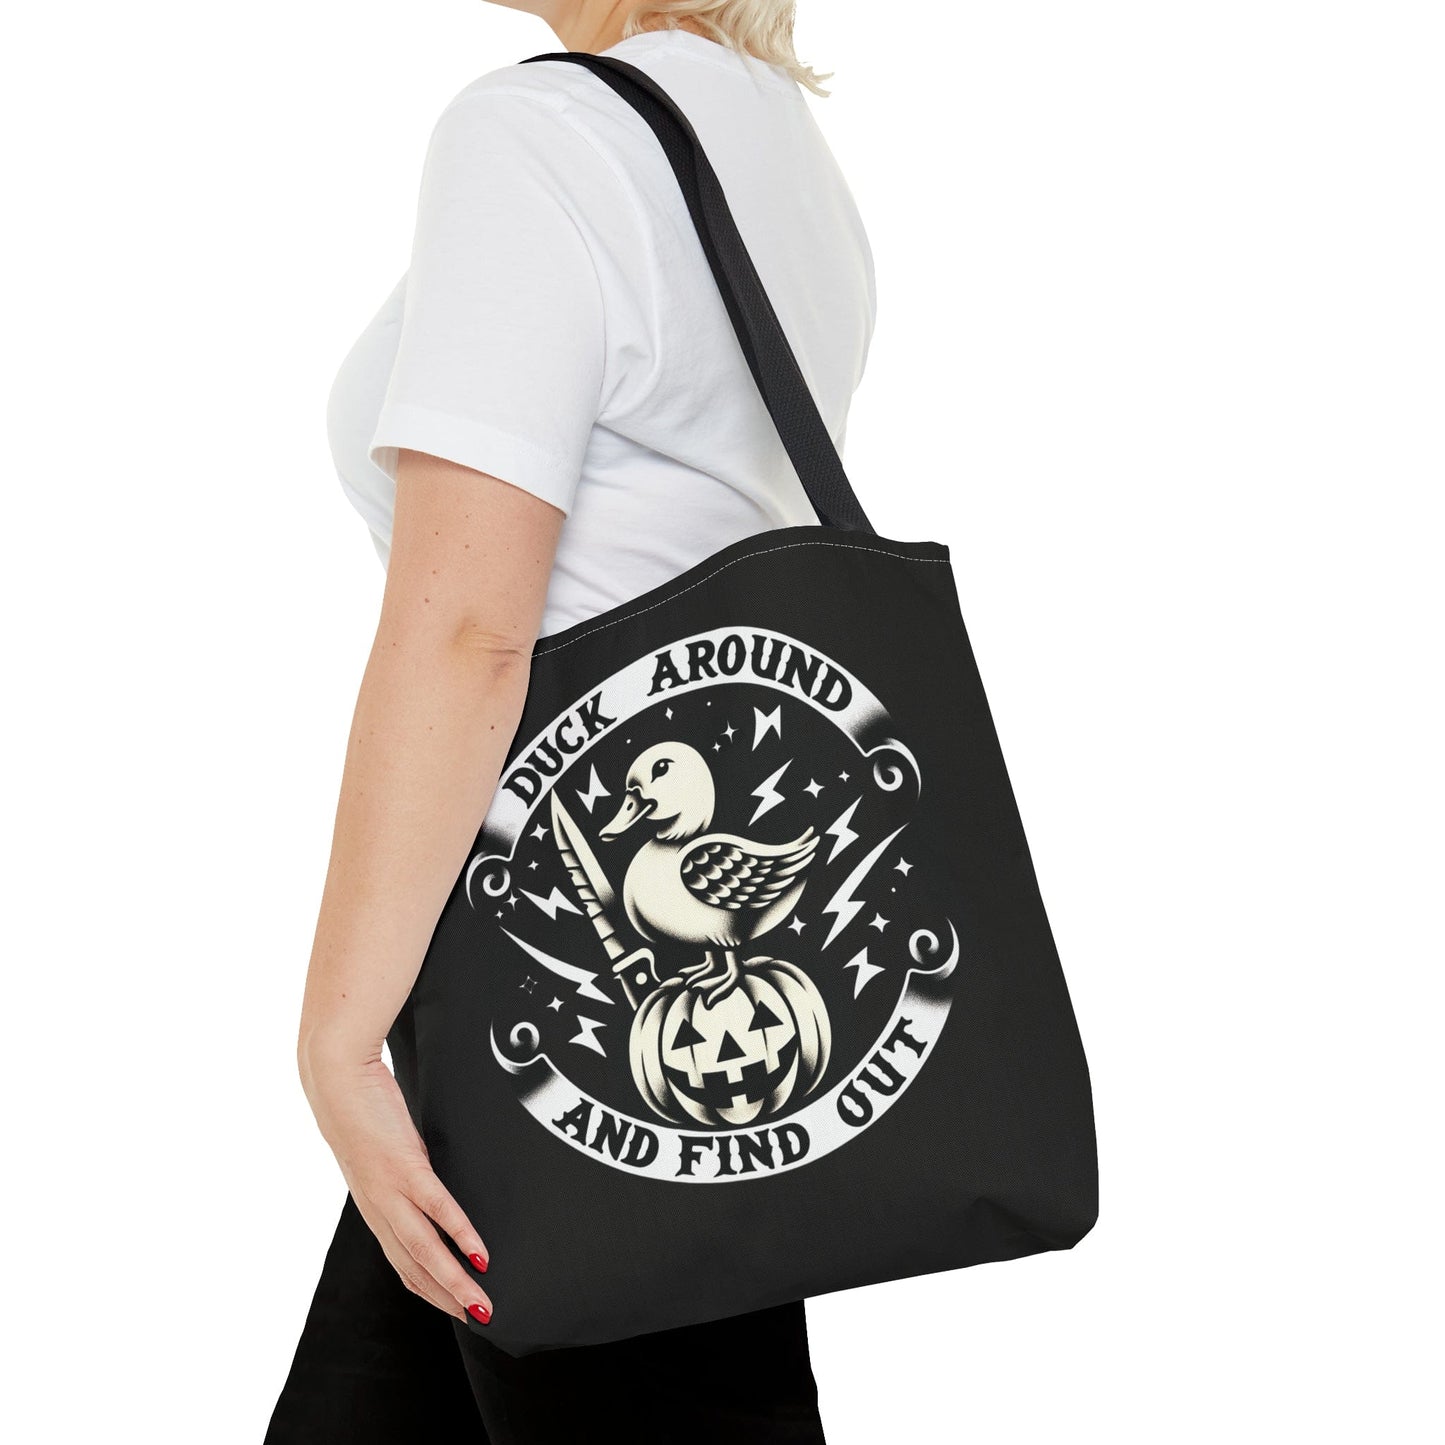 Duck Around Tote Bag